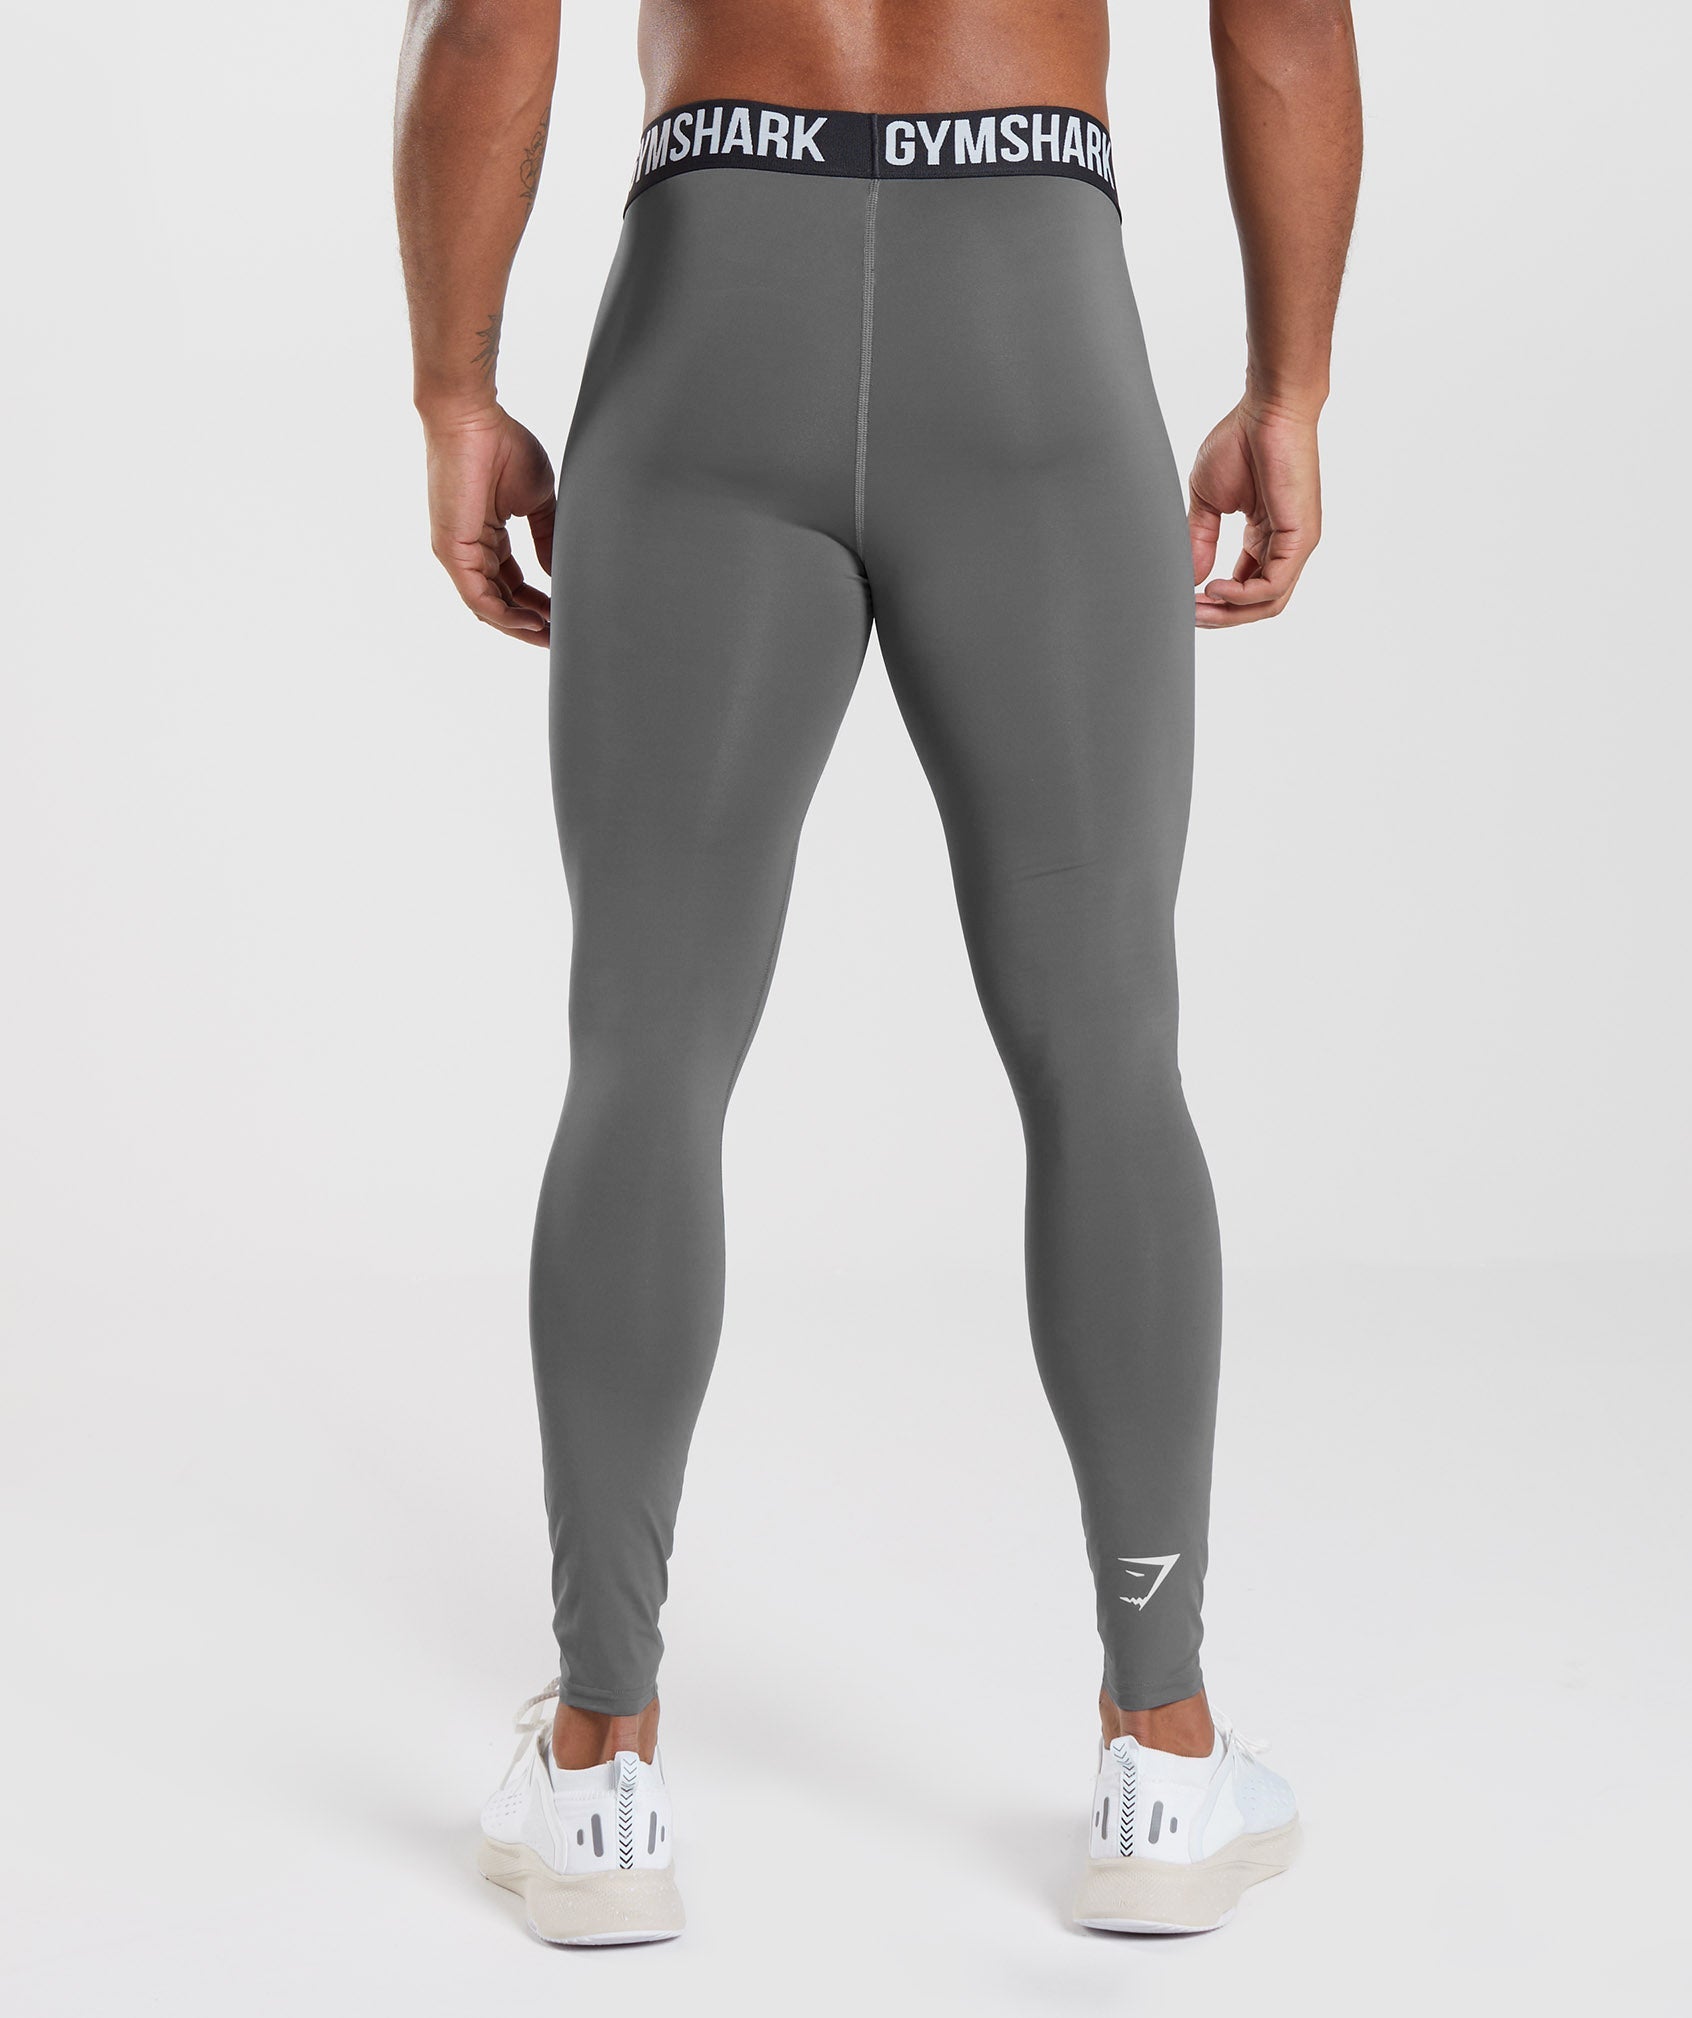 Element Baselayer Leggings in Charcoal - view 2